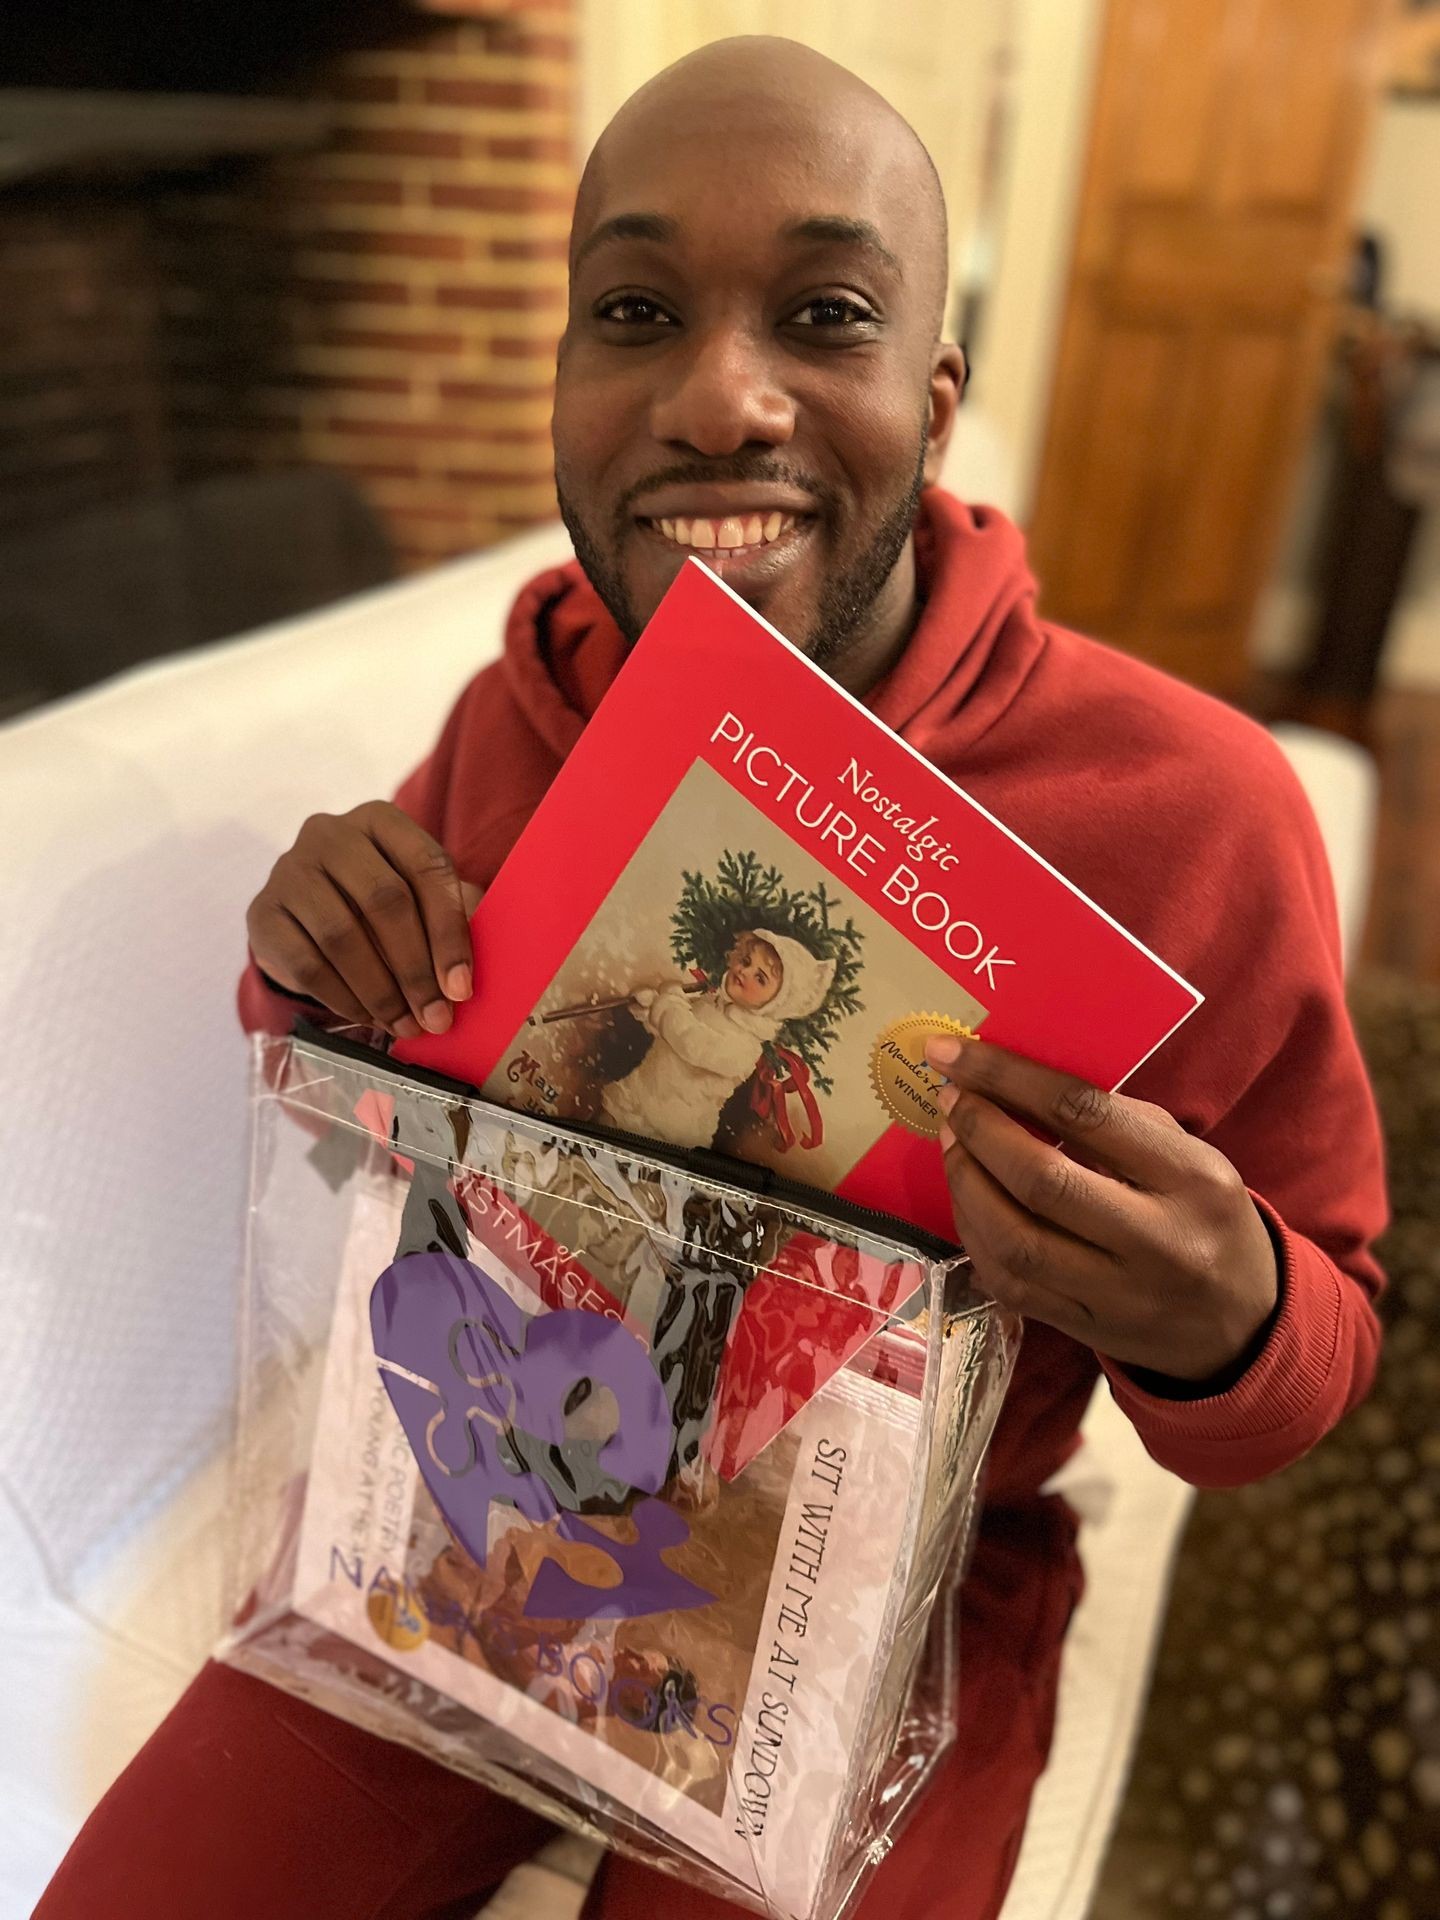  A young male caregiver holds a tote full of NANA’S BOOKS. He is wearing a red sweatshirt. NANA’S BOOKS are for people living with dementia.